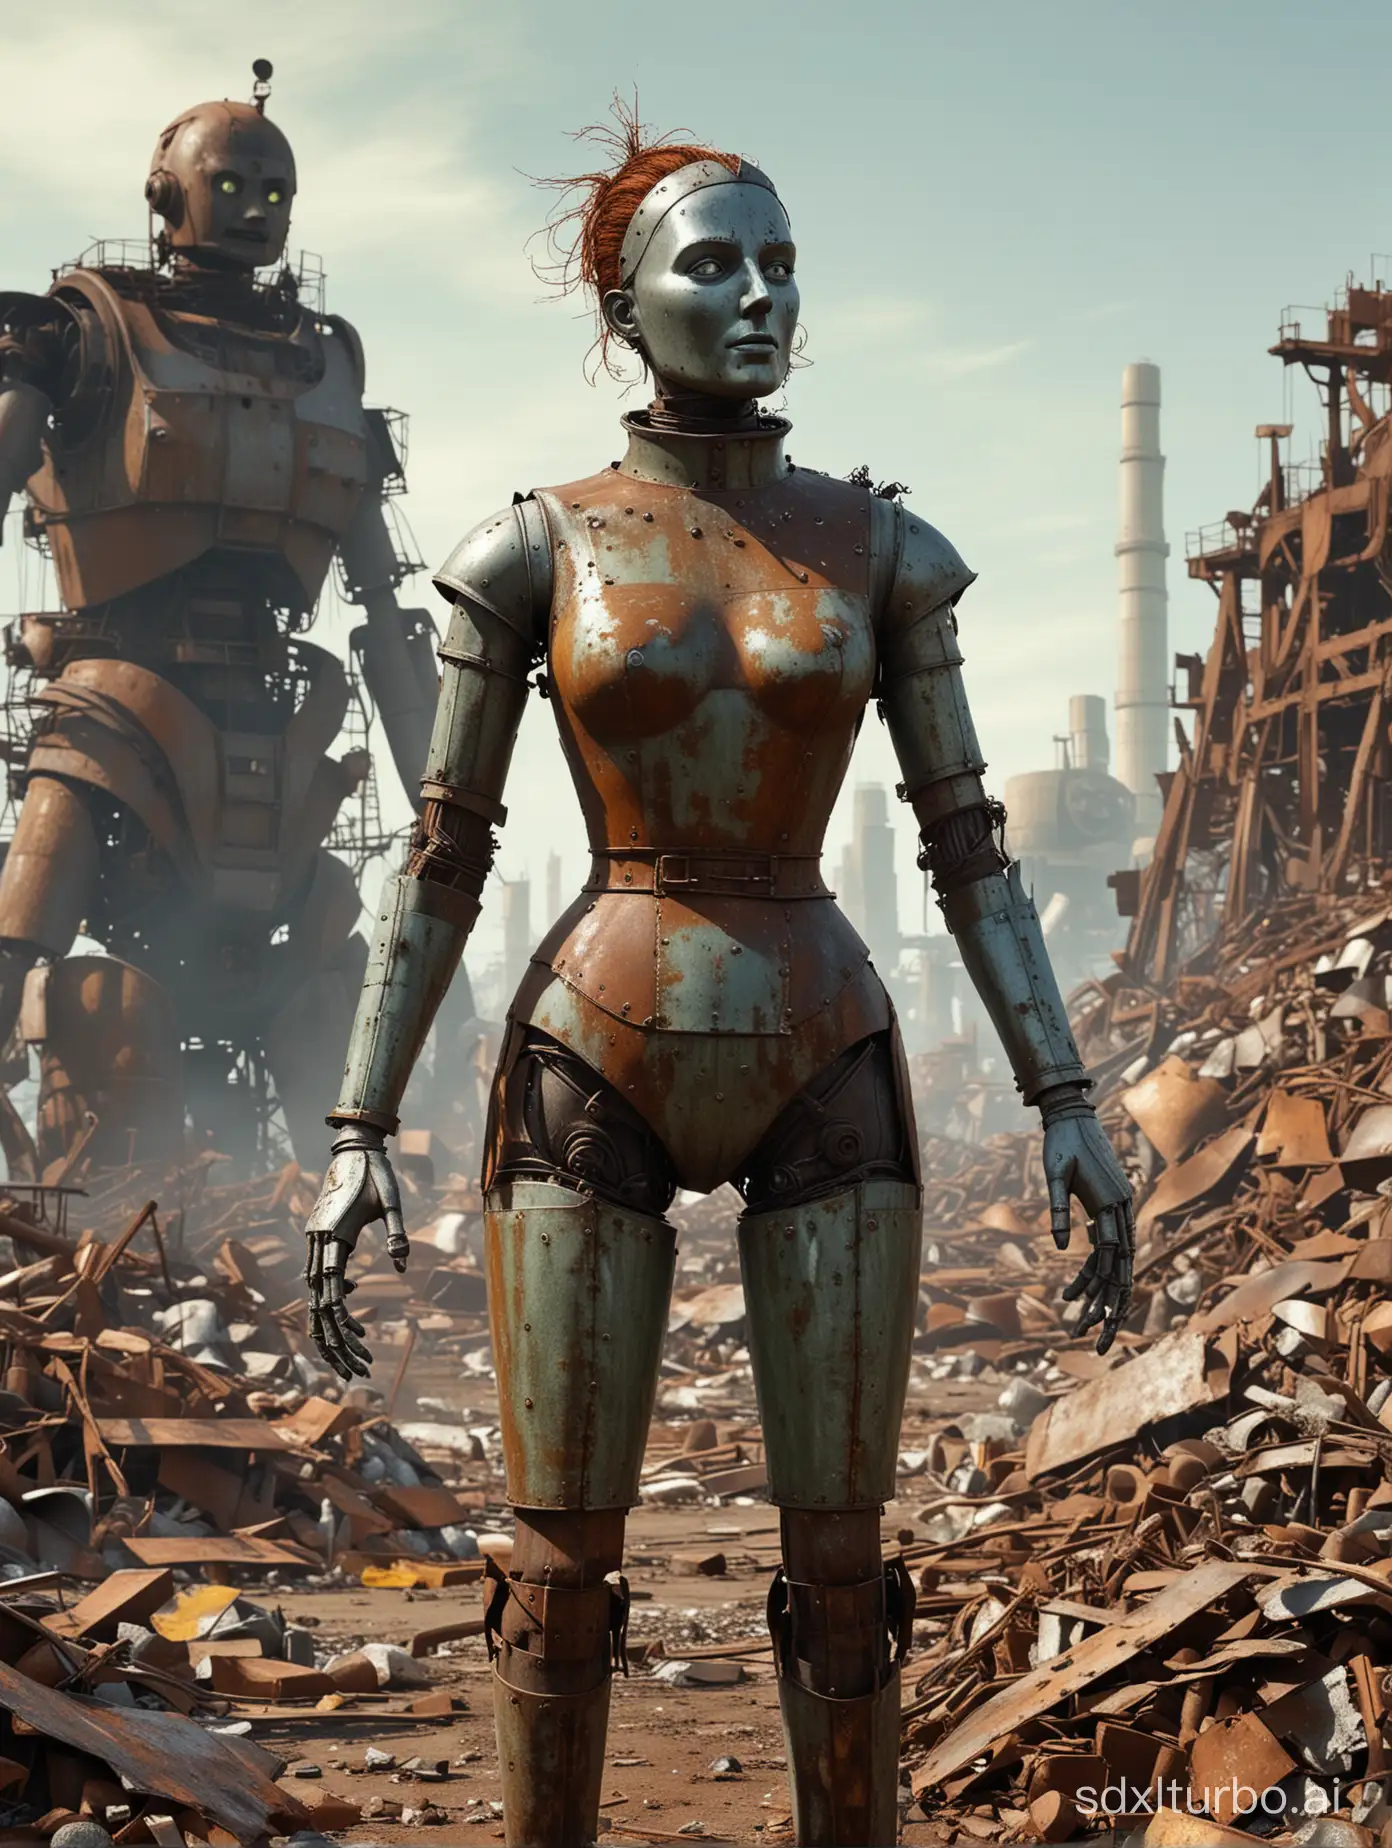 A rusty female Tin woman character with large rusty metal breasts and female curves and similar to the Tin Man from The Wizard of Oz is standing upright rusted and abandoned at a pile of rusty scrap metal parts ready to be incinerated in a blast furnace. THE sky is hazy green with polluted sulfur gasses. A highly realistic clear high resolution photo rendering.